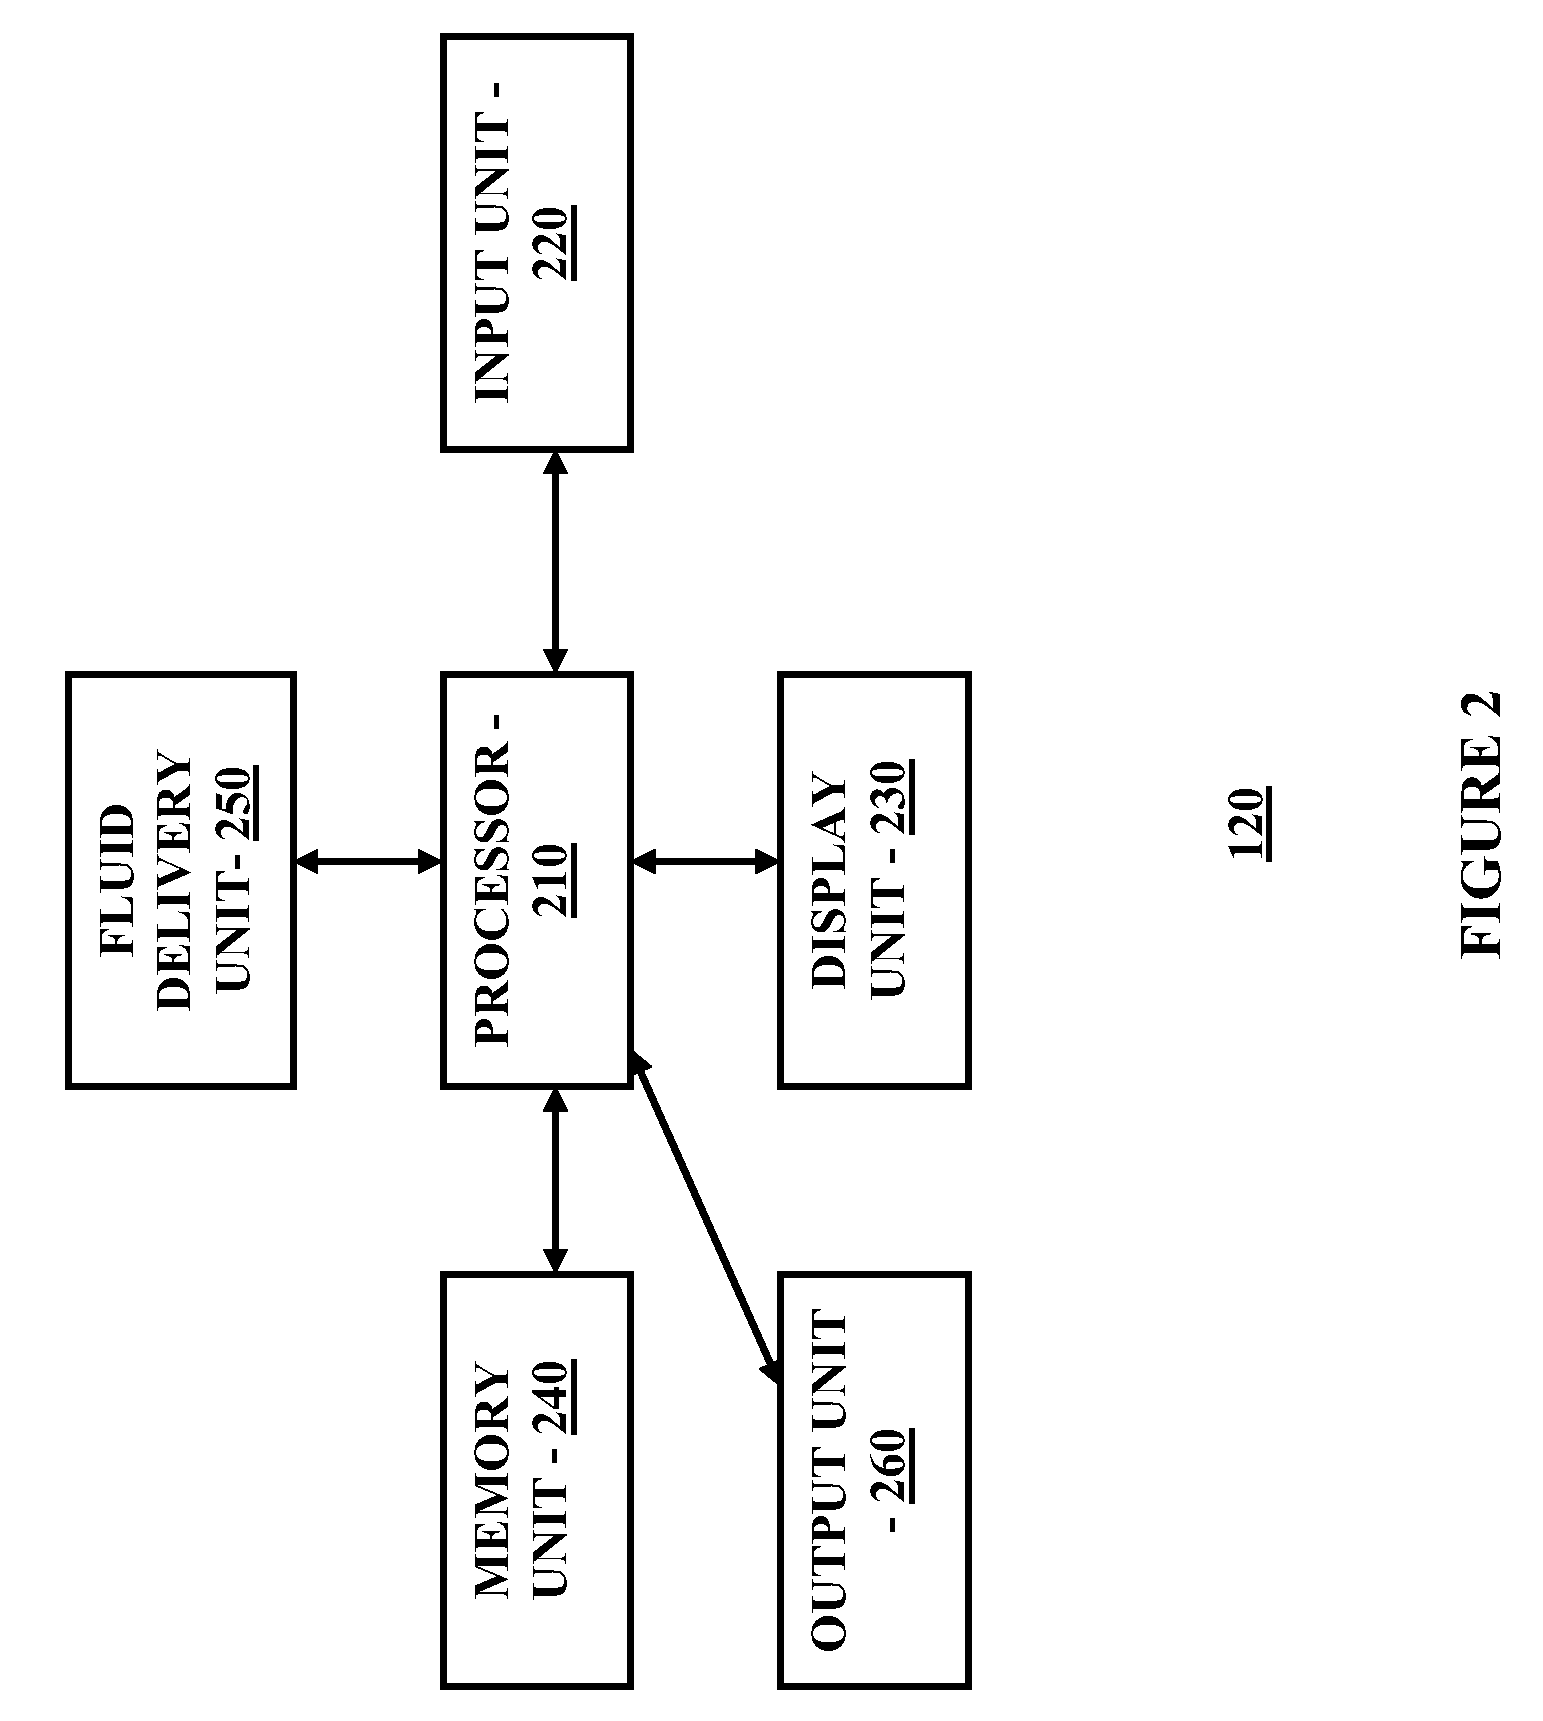 Method and System for Providing Integrated Analyte Monitoring and Infusion System Therapy Management